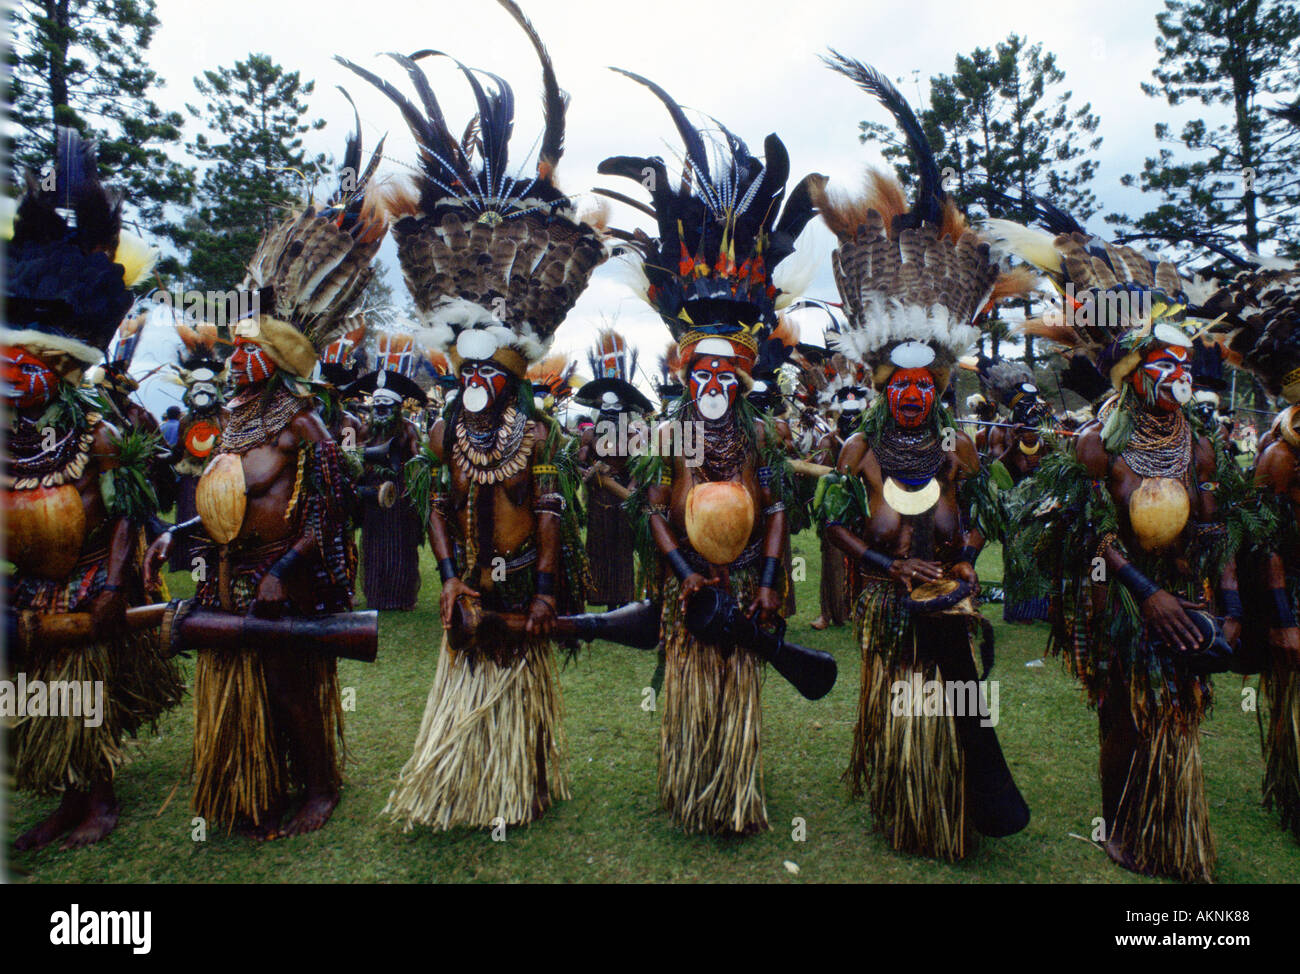 Tribes people in war paints at gathering of tribes Mount Hagen Papua New Guinea South Pacific Stock Photo